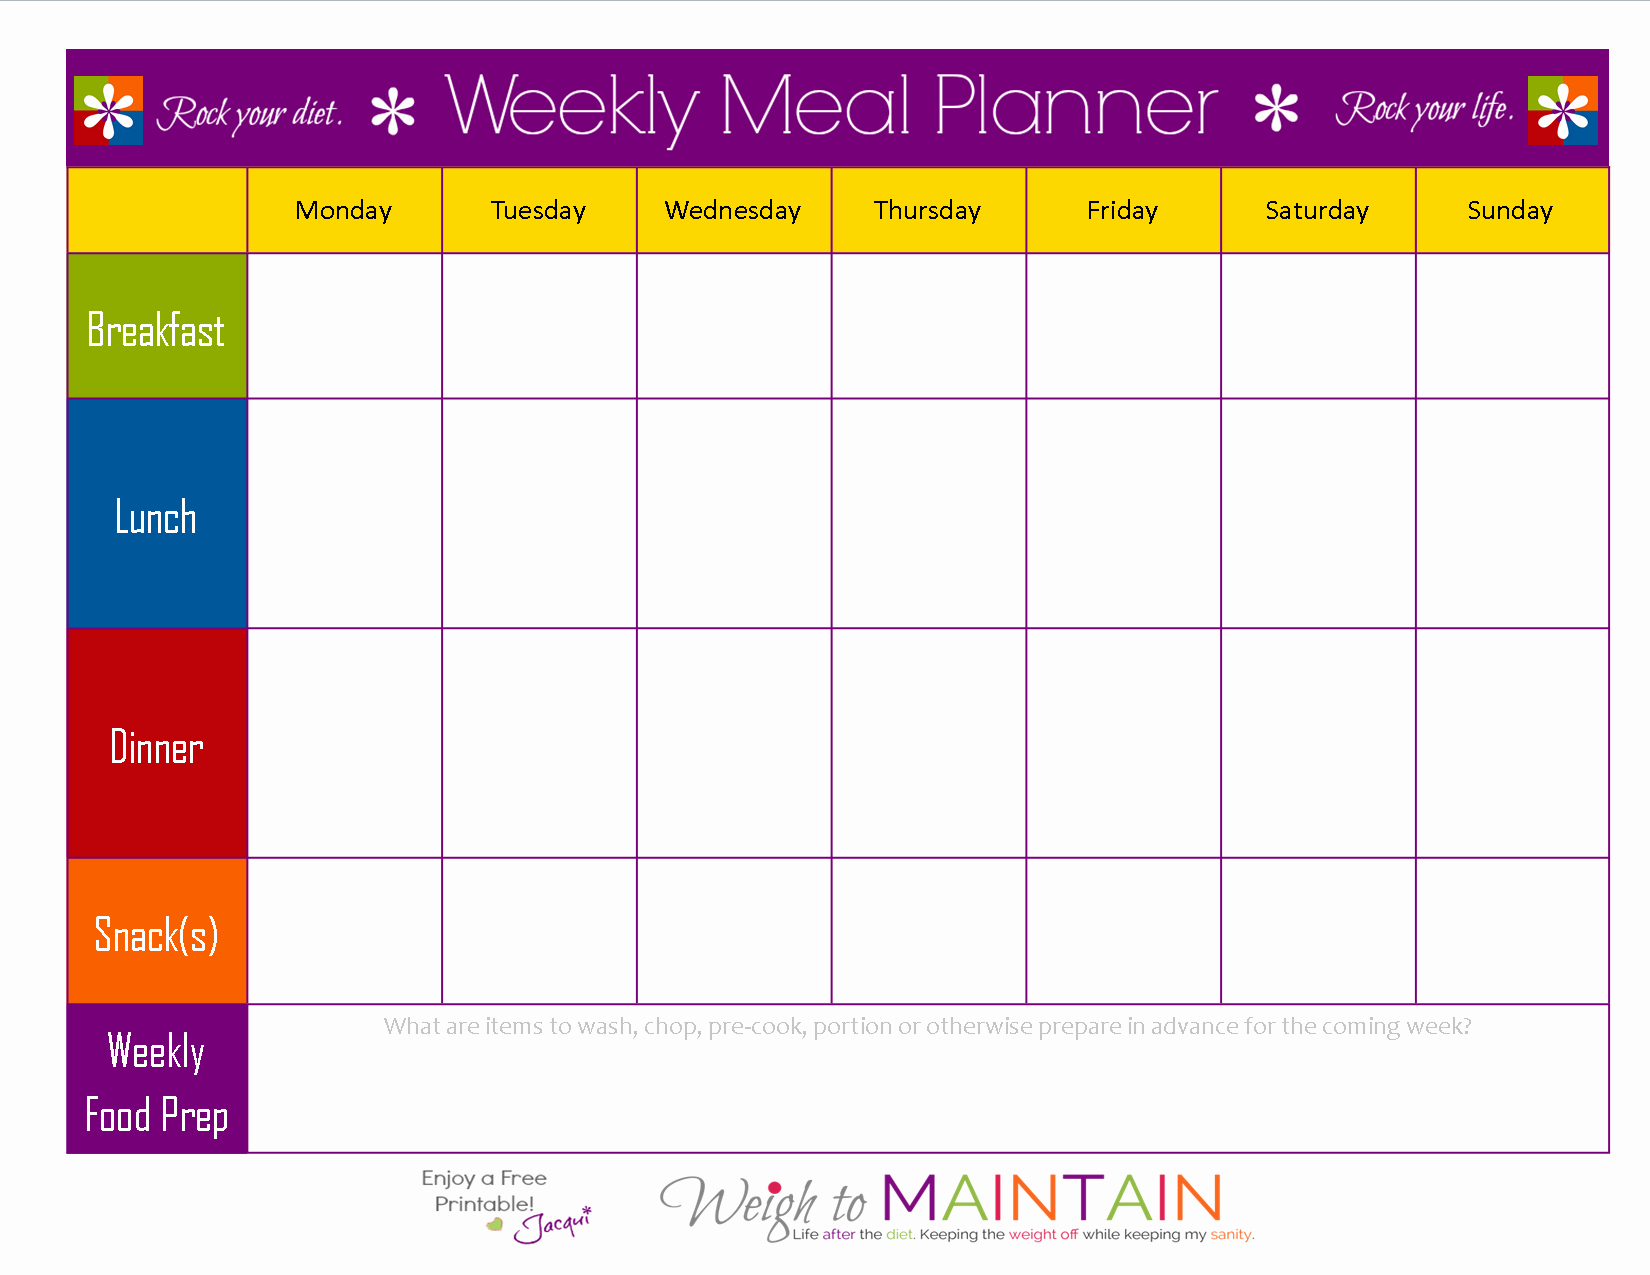 Weekly Meal and Snack Planner Awesome Meal Planning so Simple even A Gym Bro Can Do It with